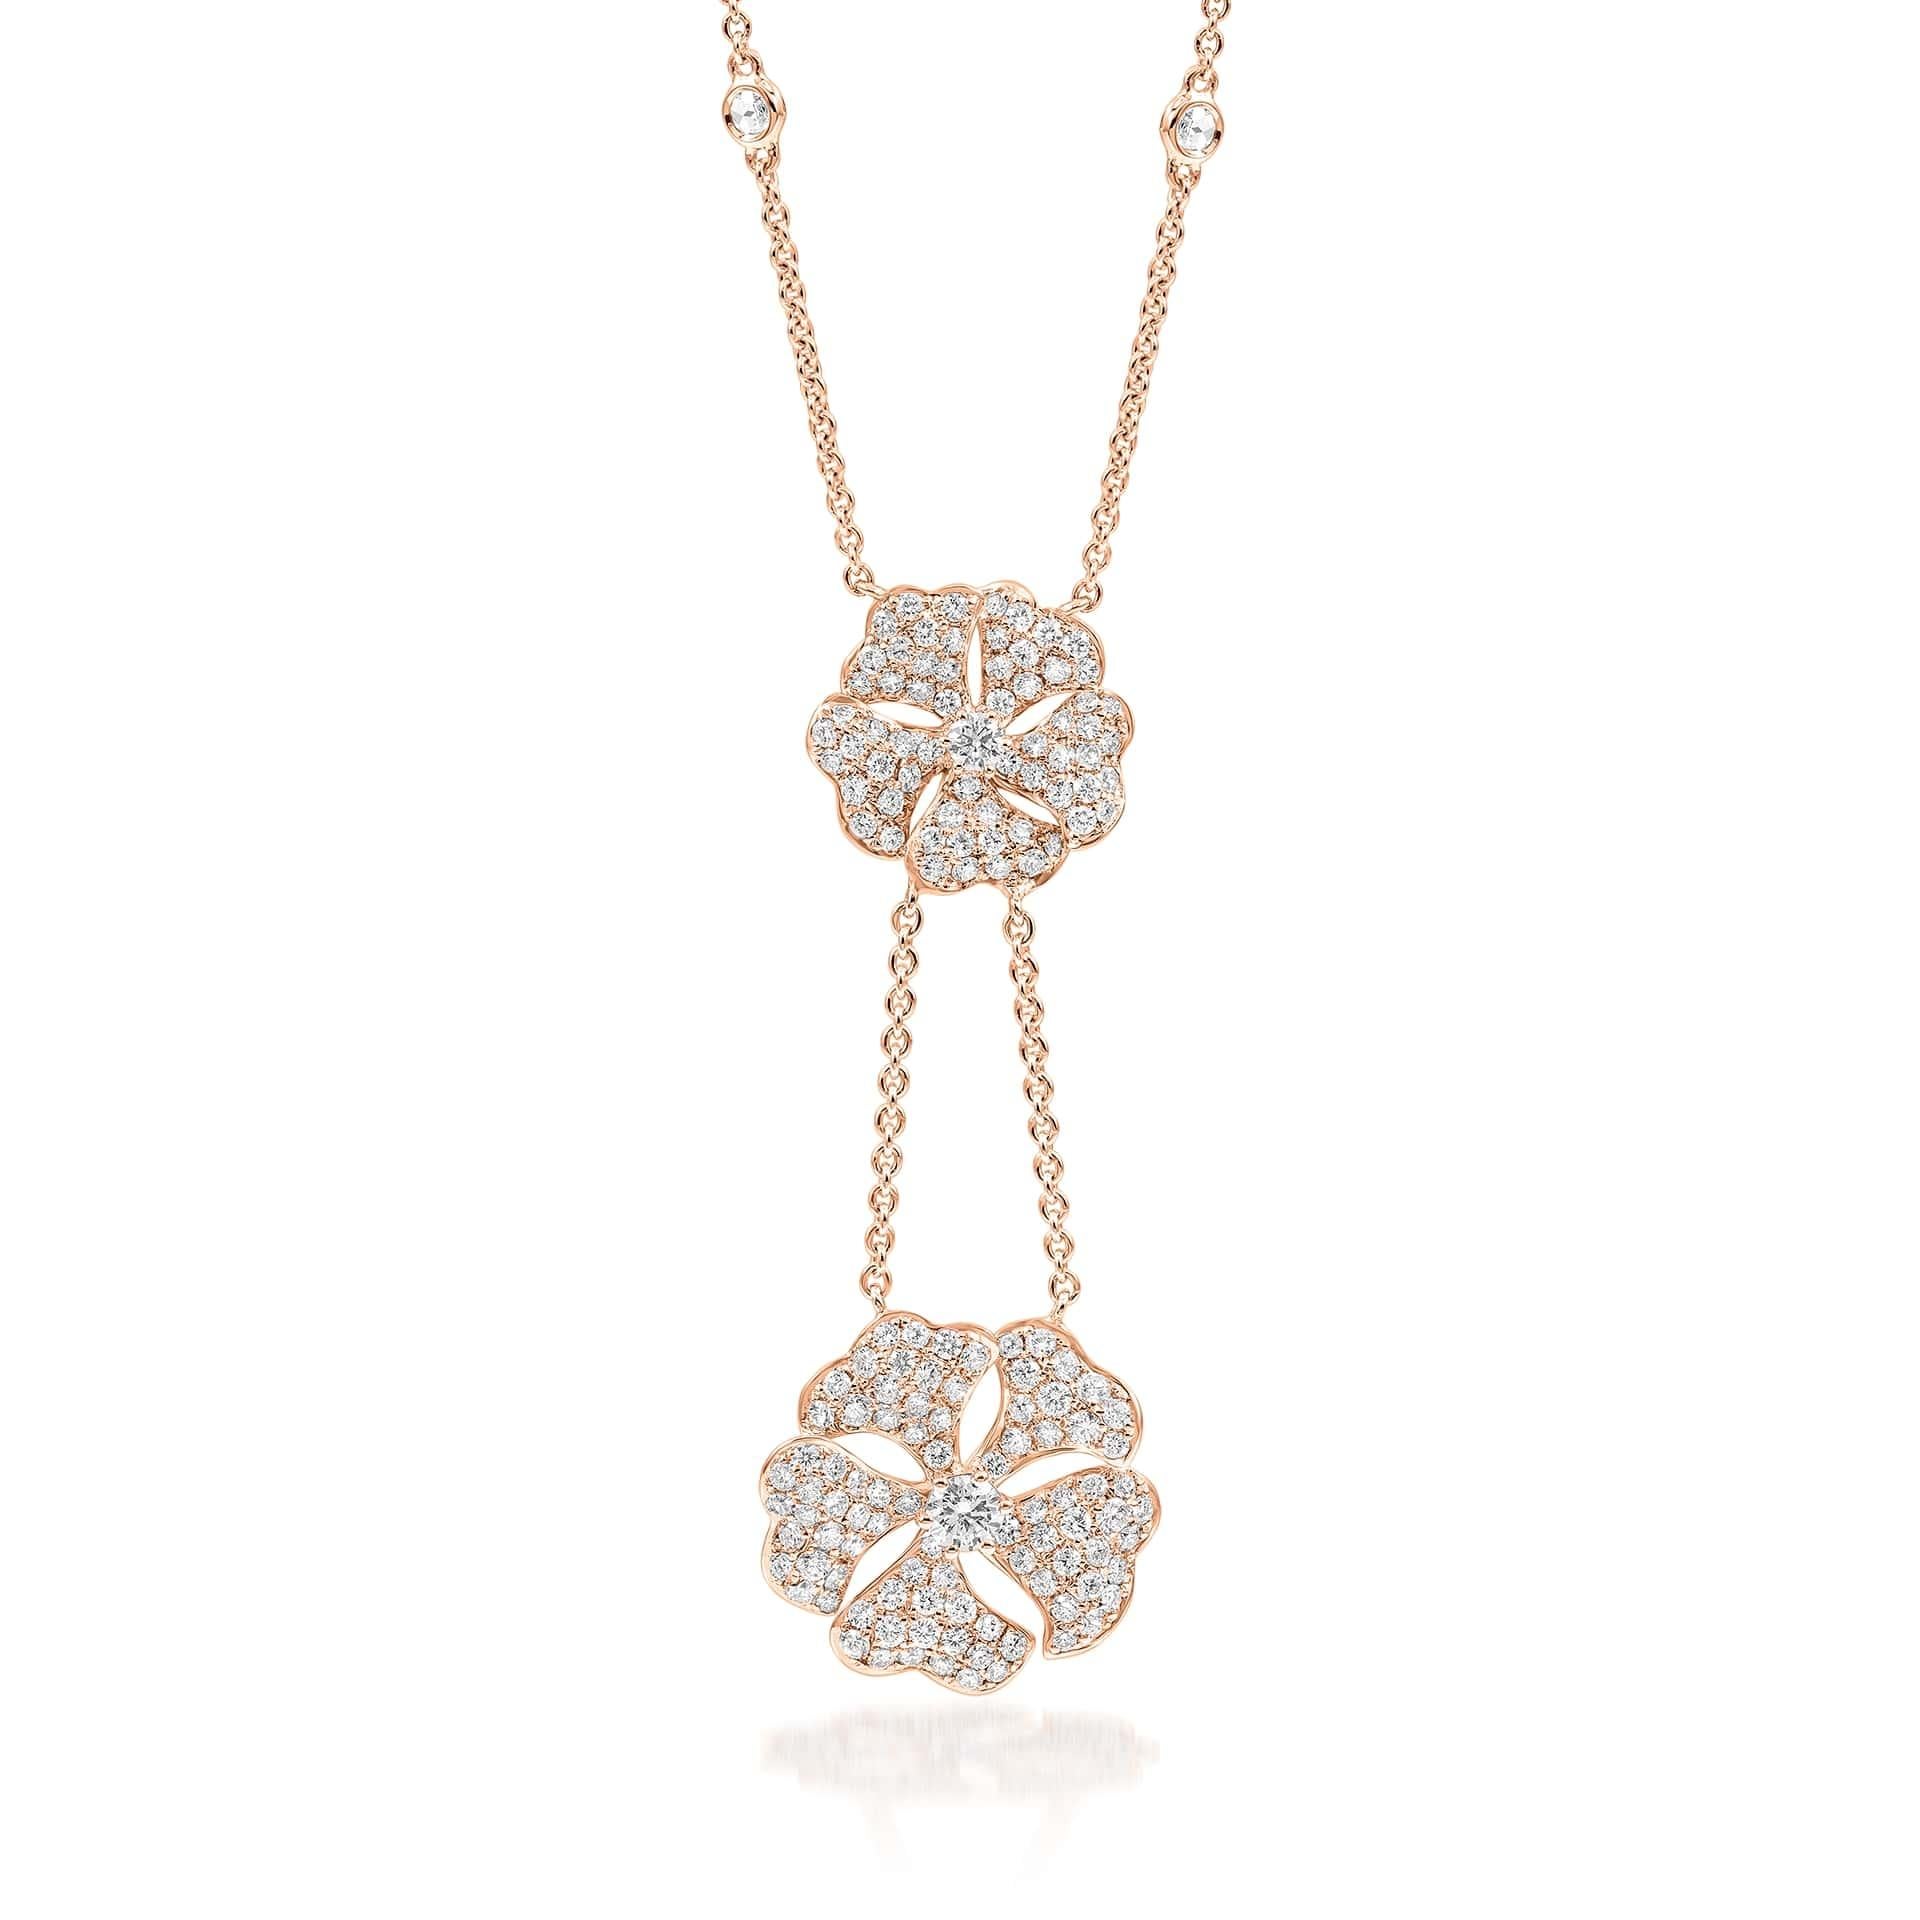 Bloom Diamond Drop Flower Necklace in 18K Rose Gold

Inspired by the exquisite petals of the alpine cinquefoil flower, the Bloom collection combines the richness of diamonds and precious metals with the light versatility of this delicate,